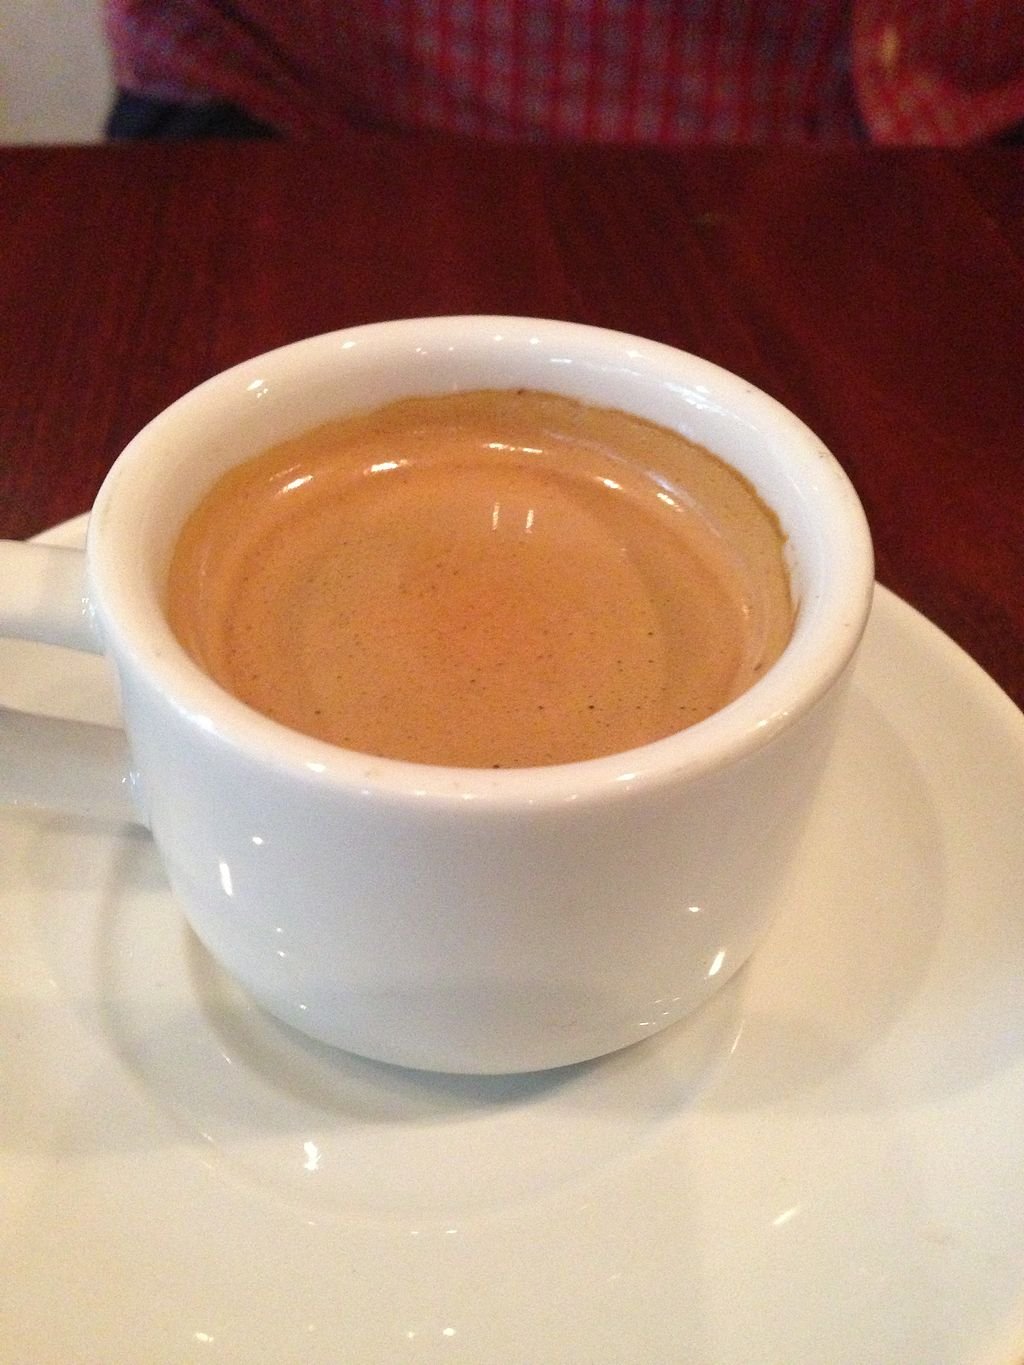 Why is Cuban Coffee so strong?